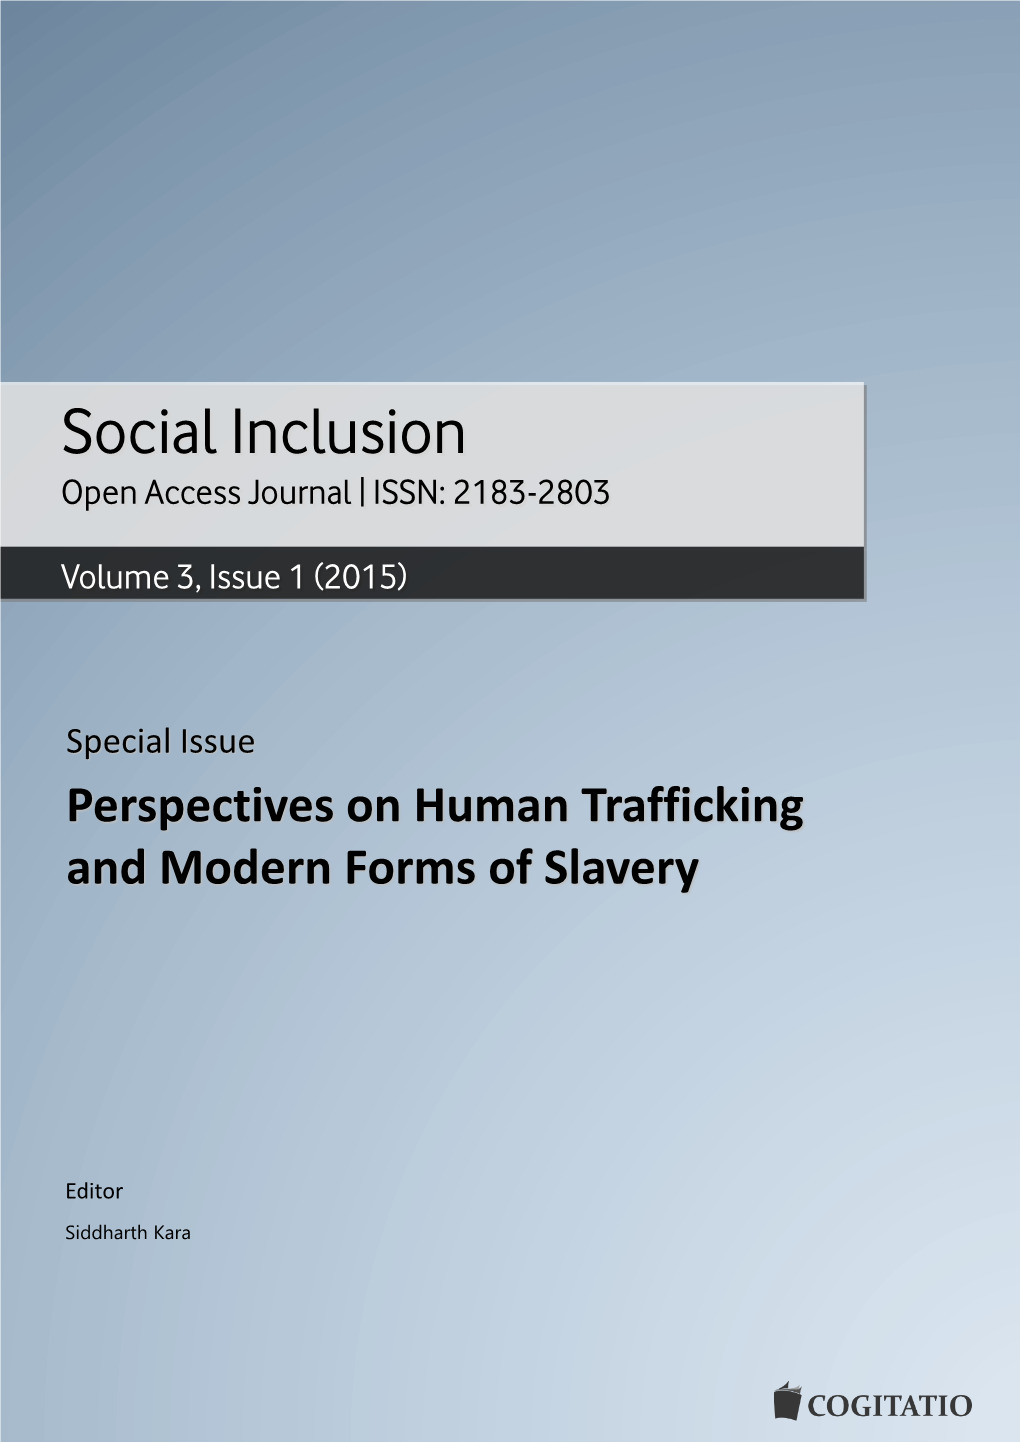 Social Inclusion Open Access Journal | ISSN: 2183-2803